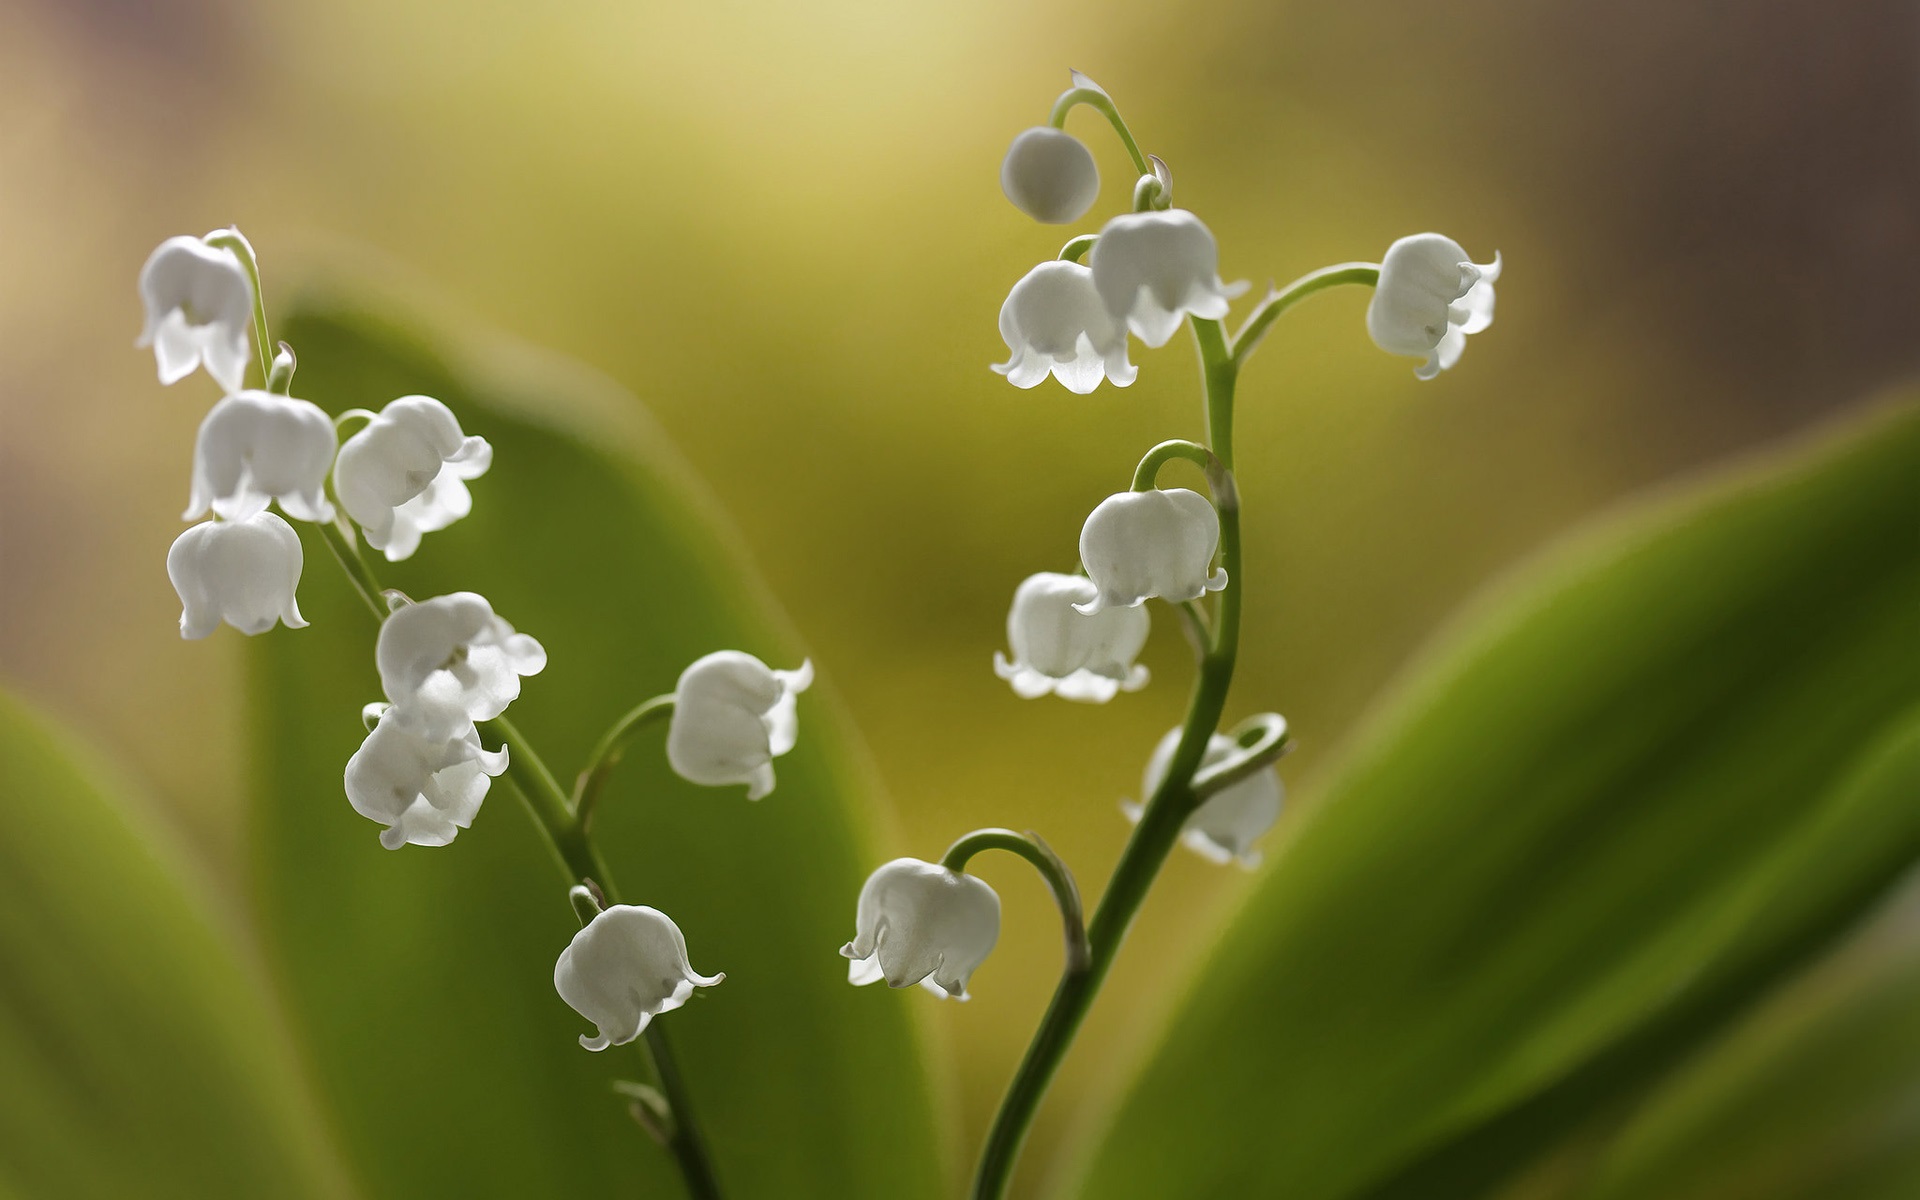 Lilies of the valley, white little flowers wallpaper | flowers ...